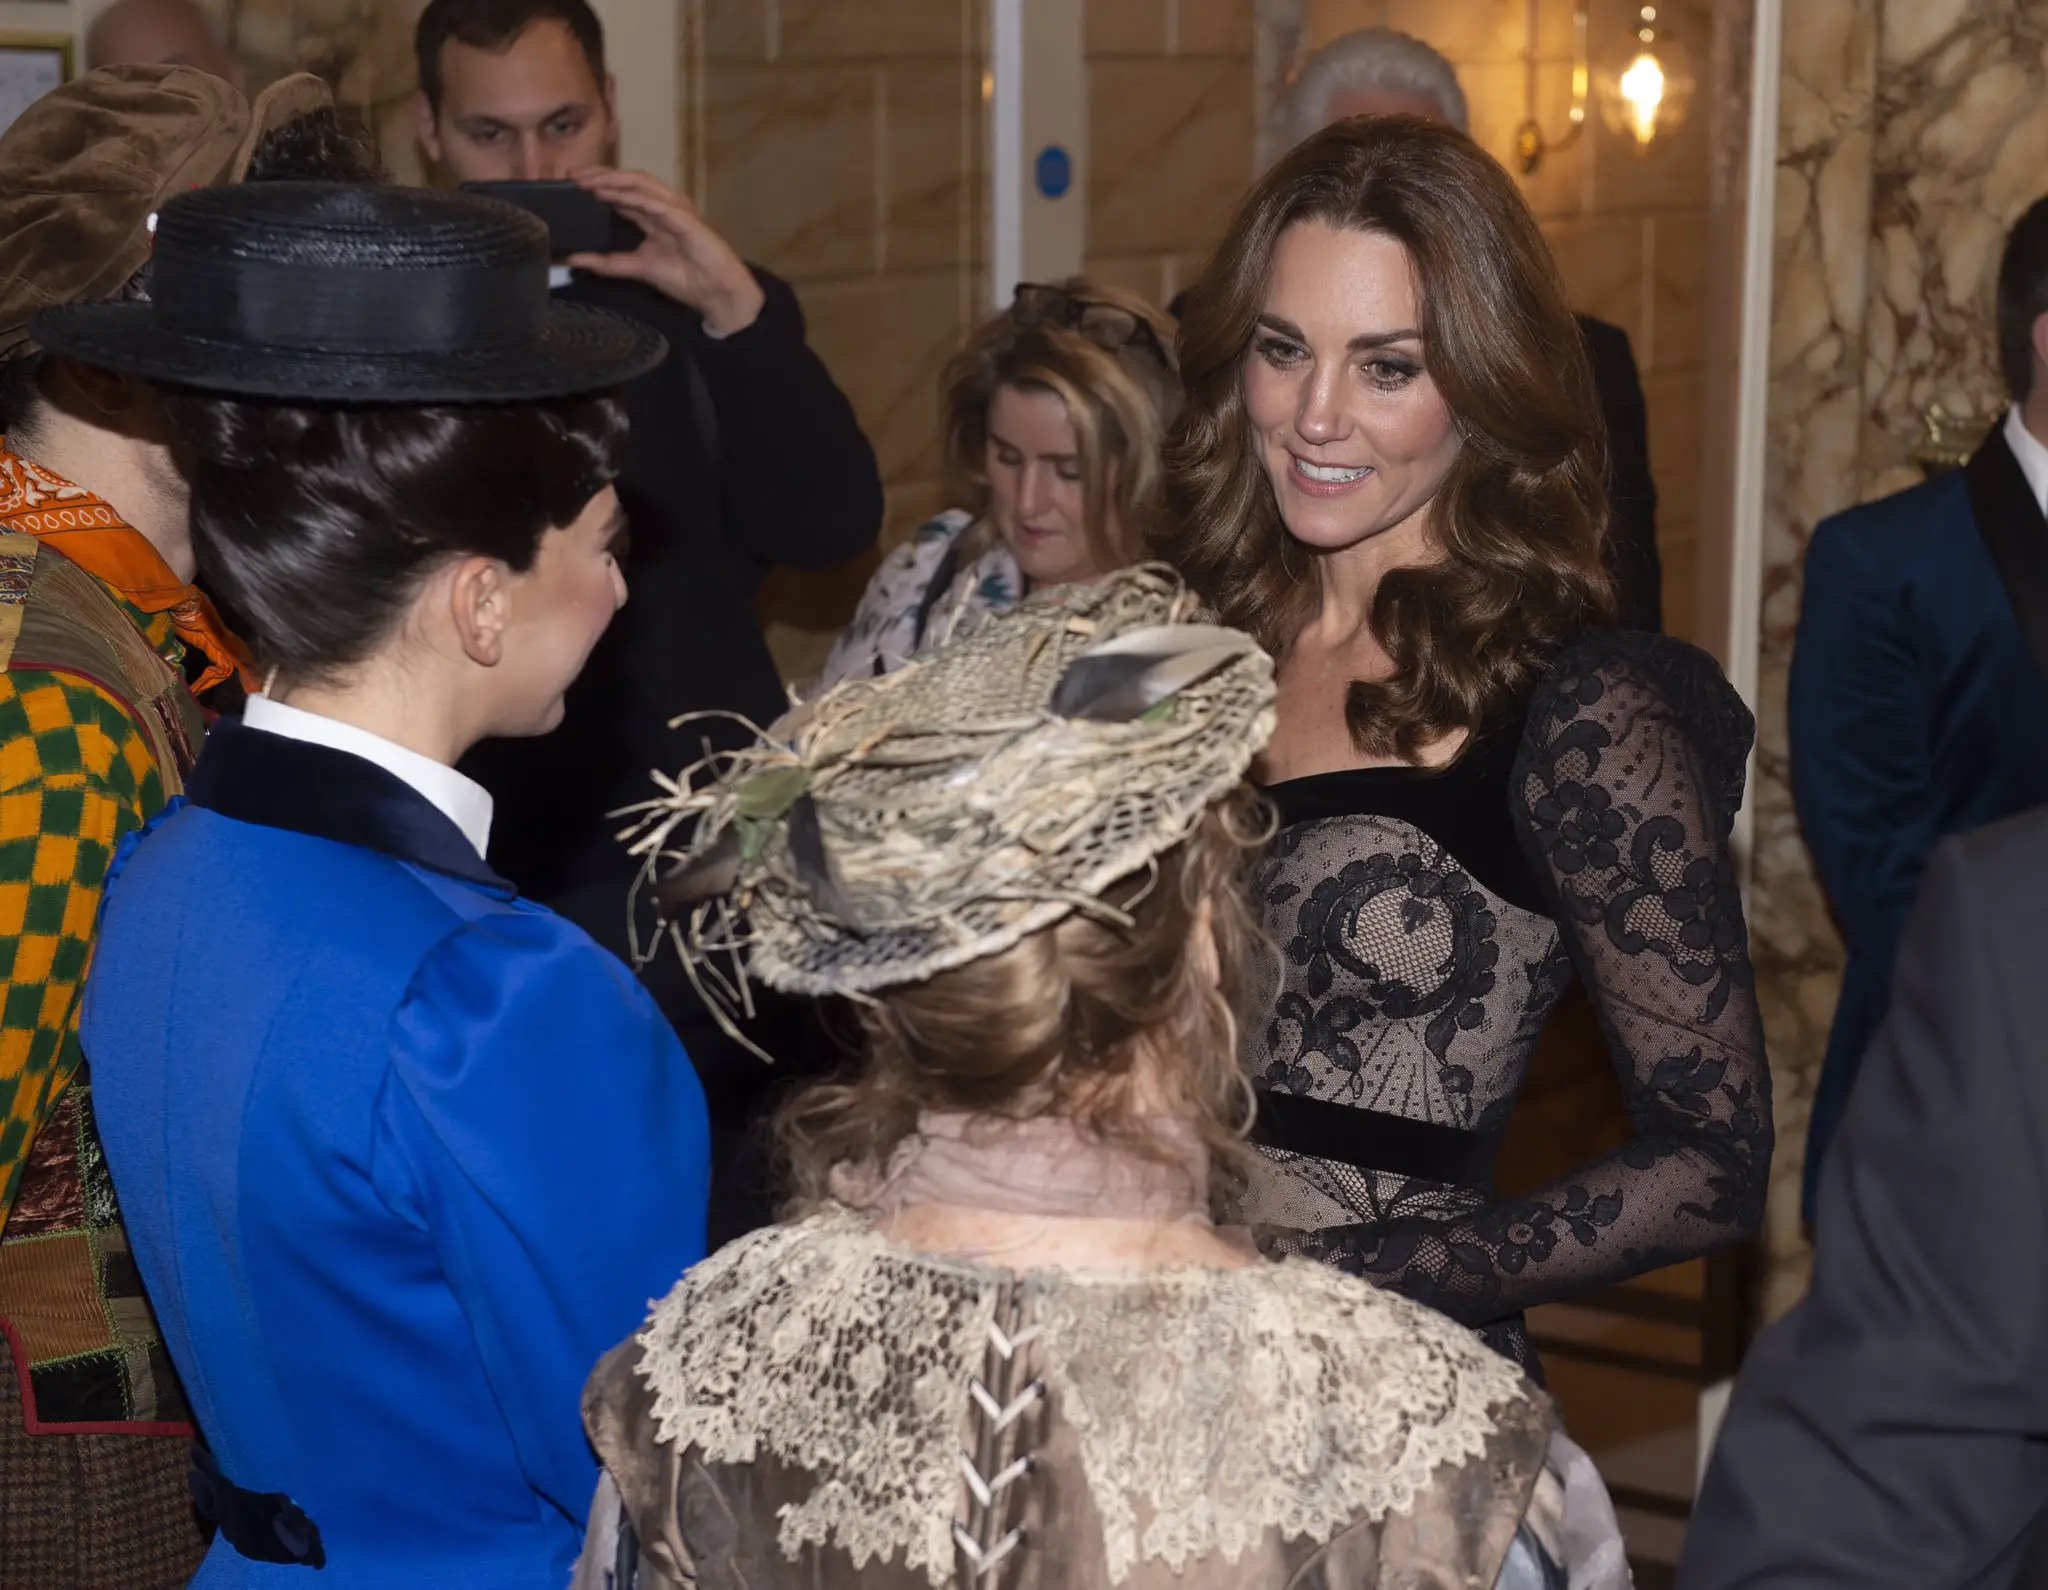 The Duchess of Cambridge in black lace Alexander McQueen at the Royal Variety